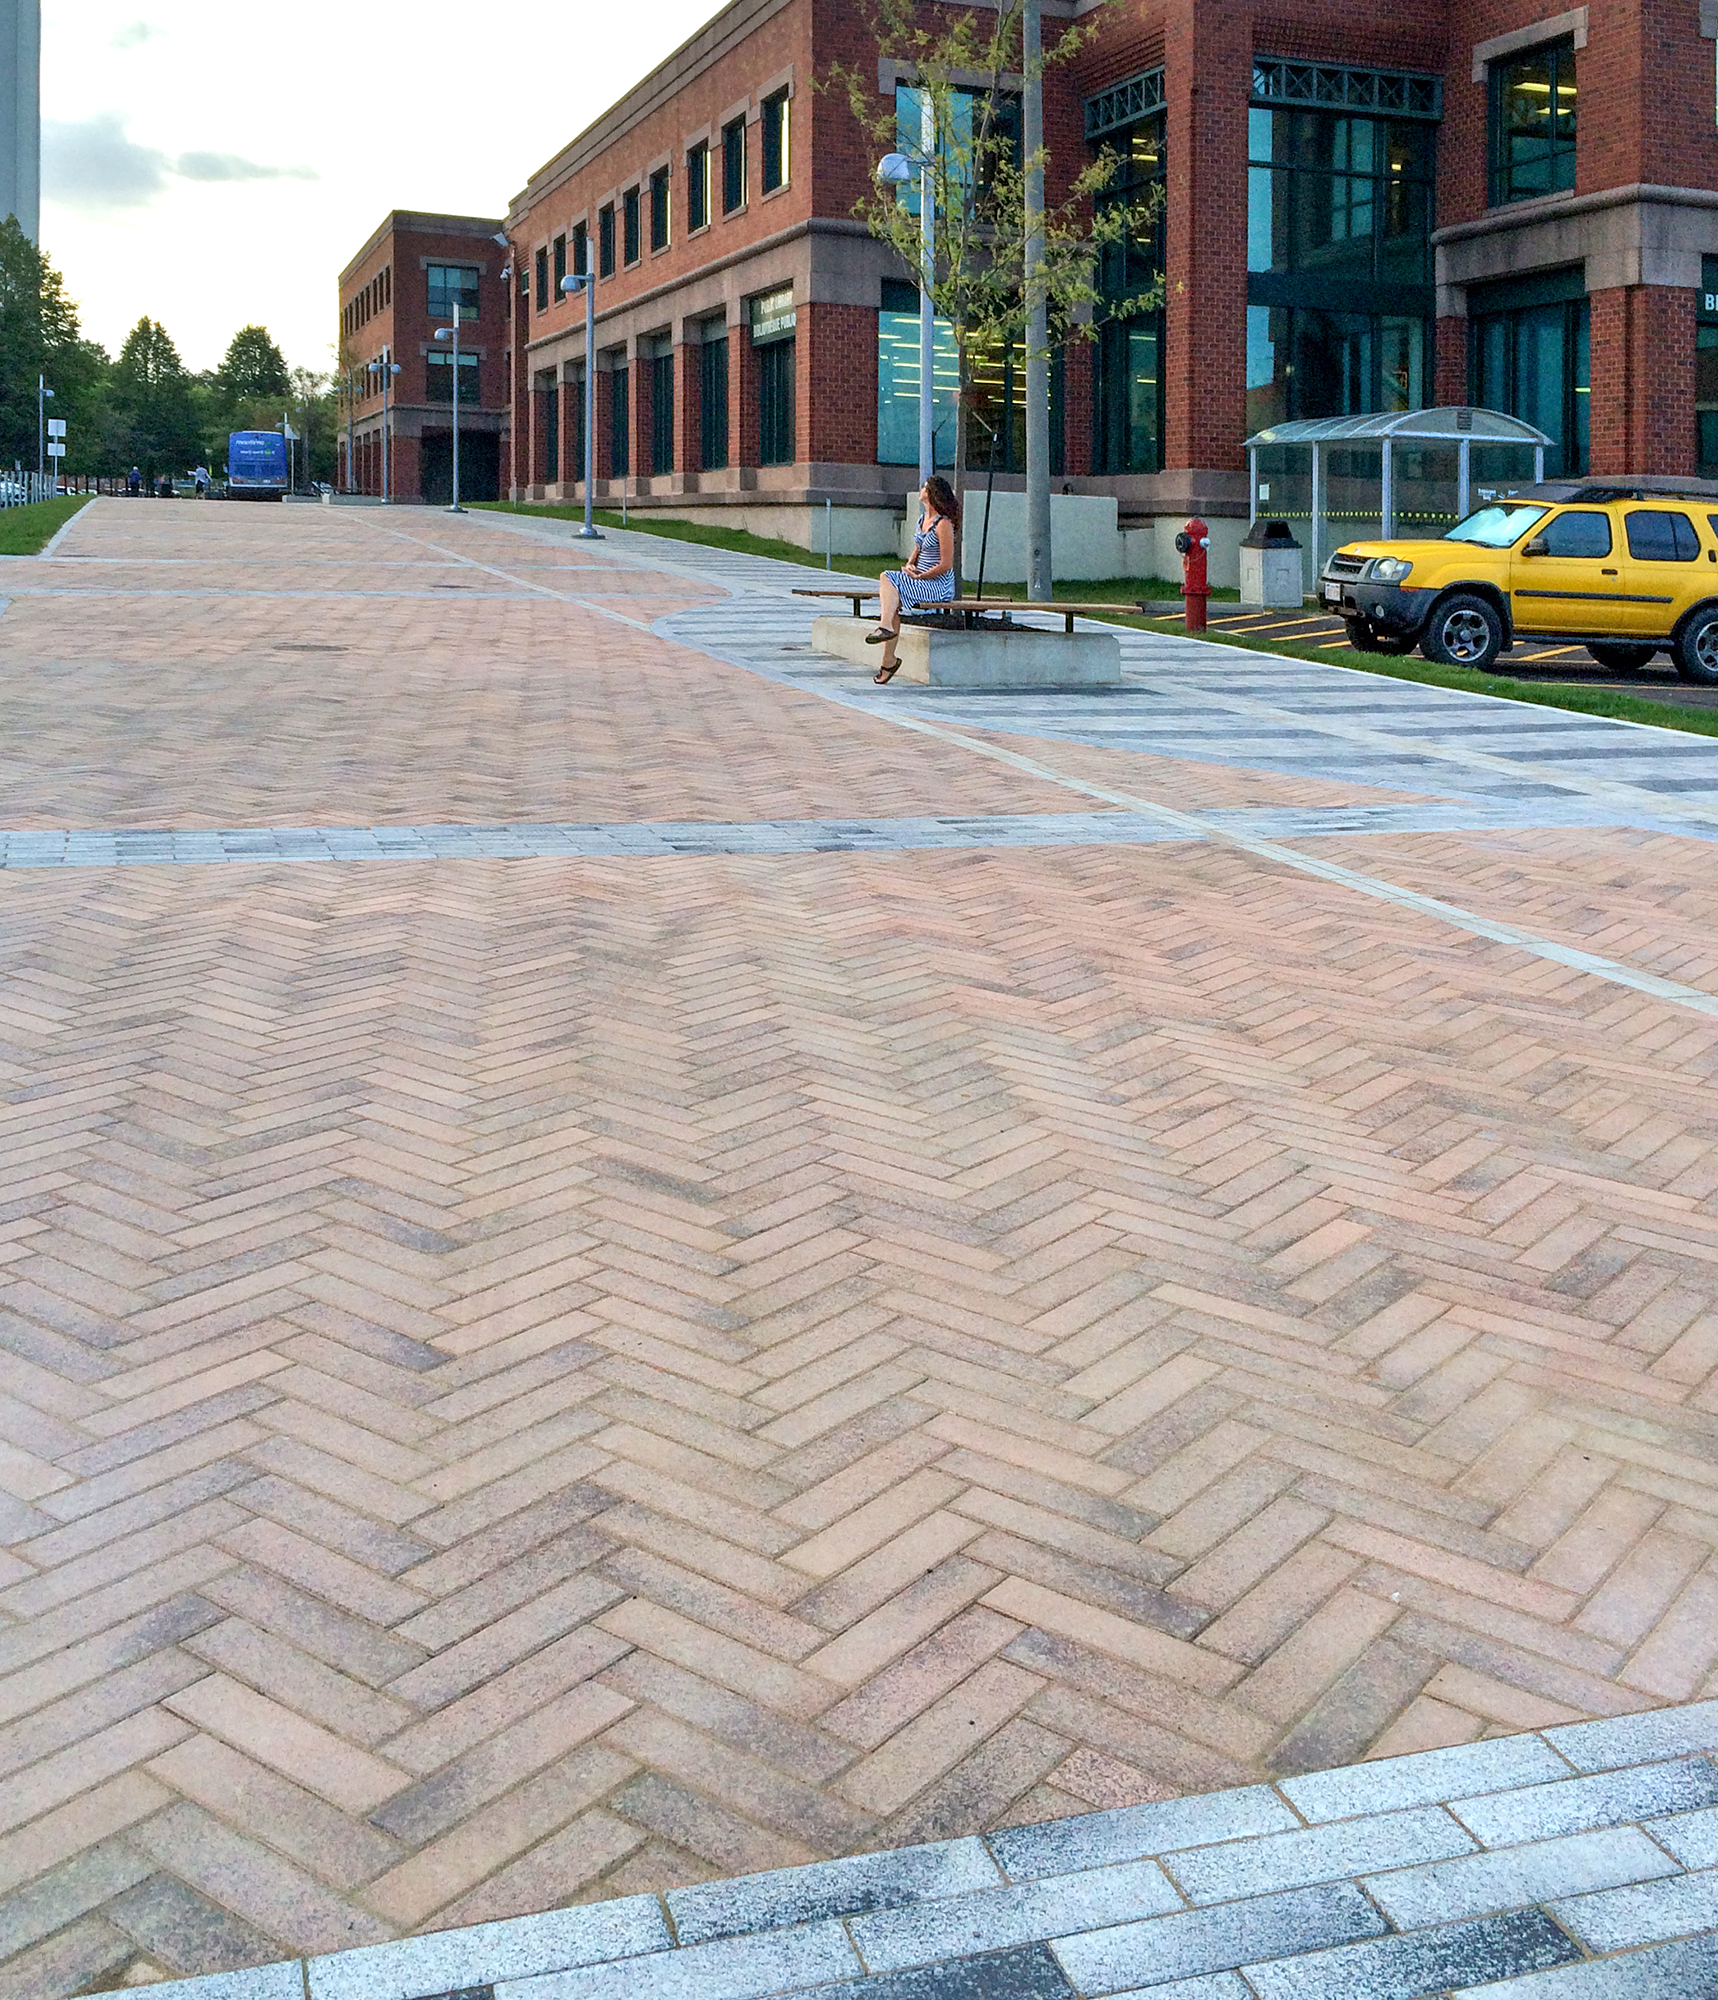  A woman sits on a bench in  pedestrian area paved with warm tones of Umbriano pavers in a zig-zag pattern contrasted with lines of grey.